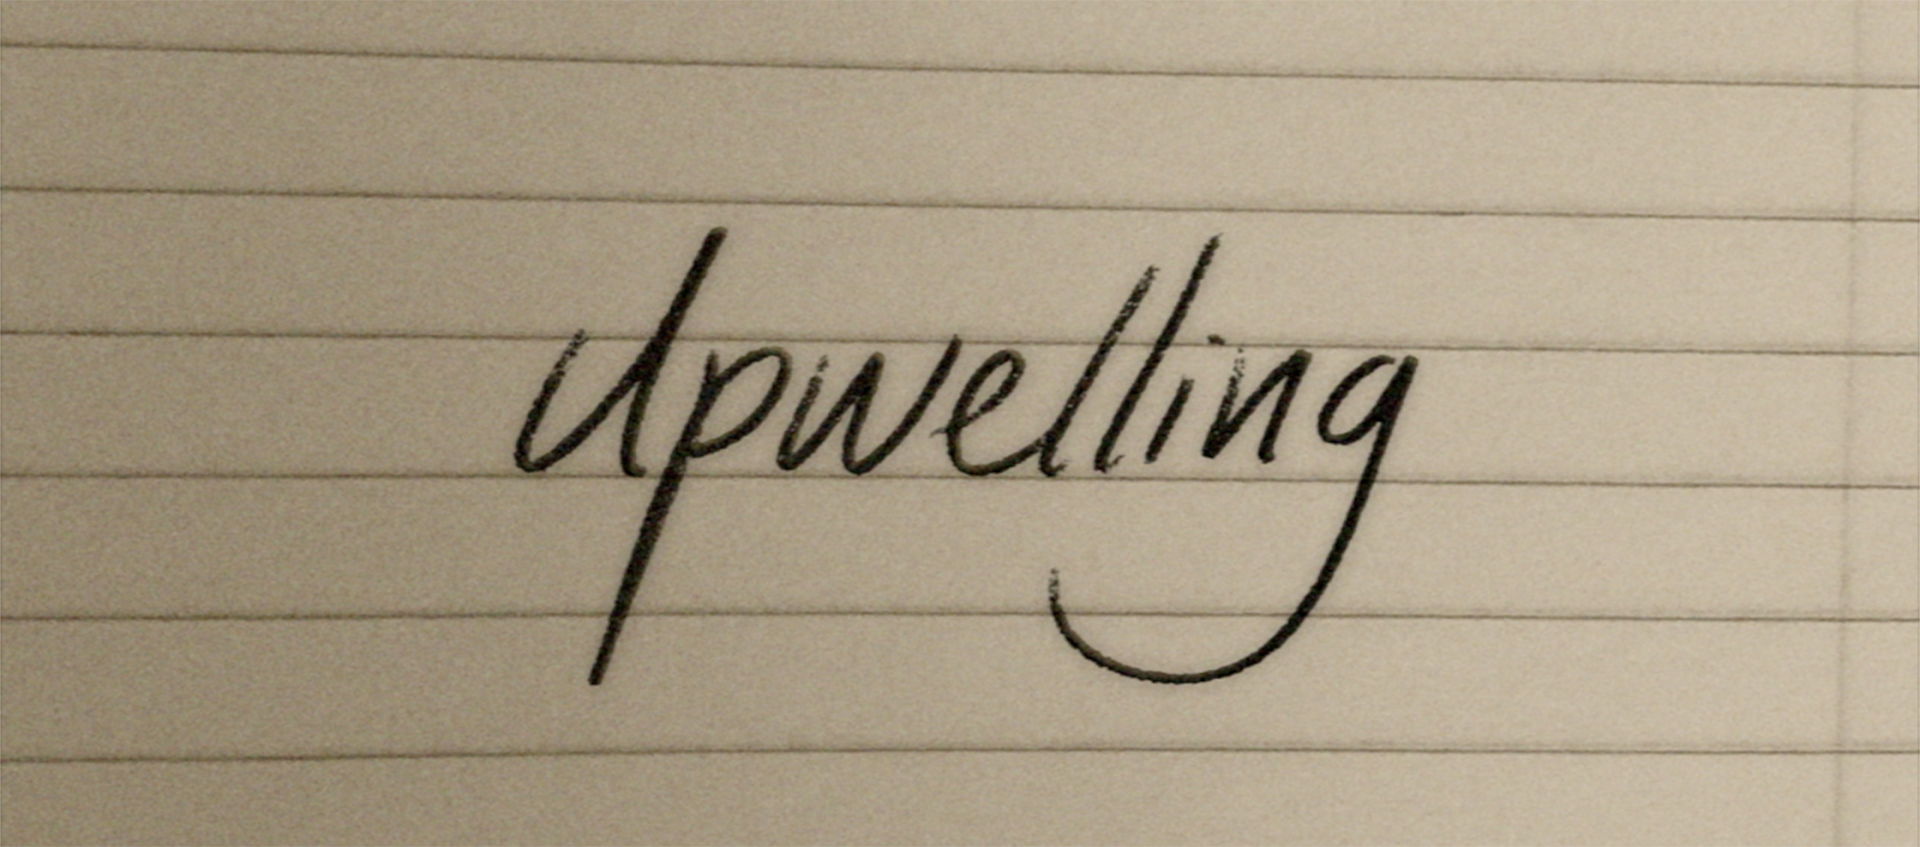 Photo of the word "Upwelling" written on notebook paper